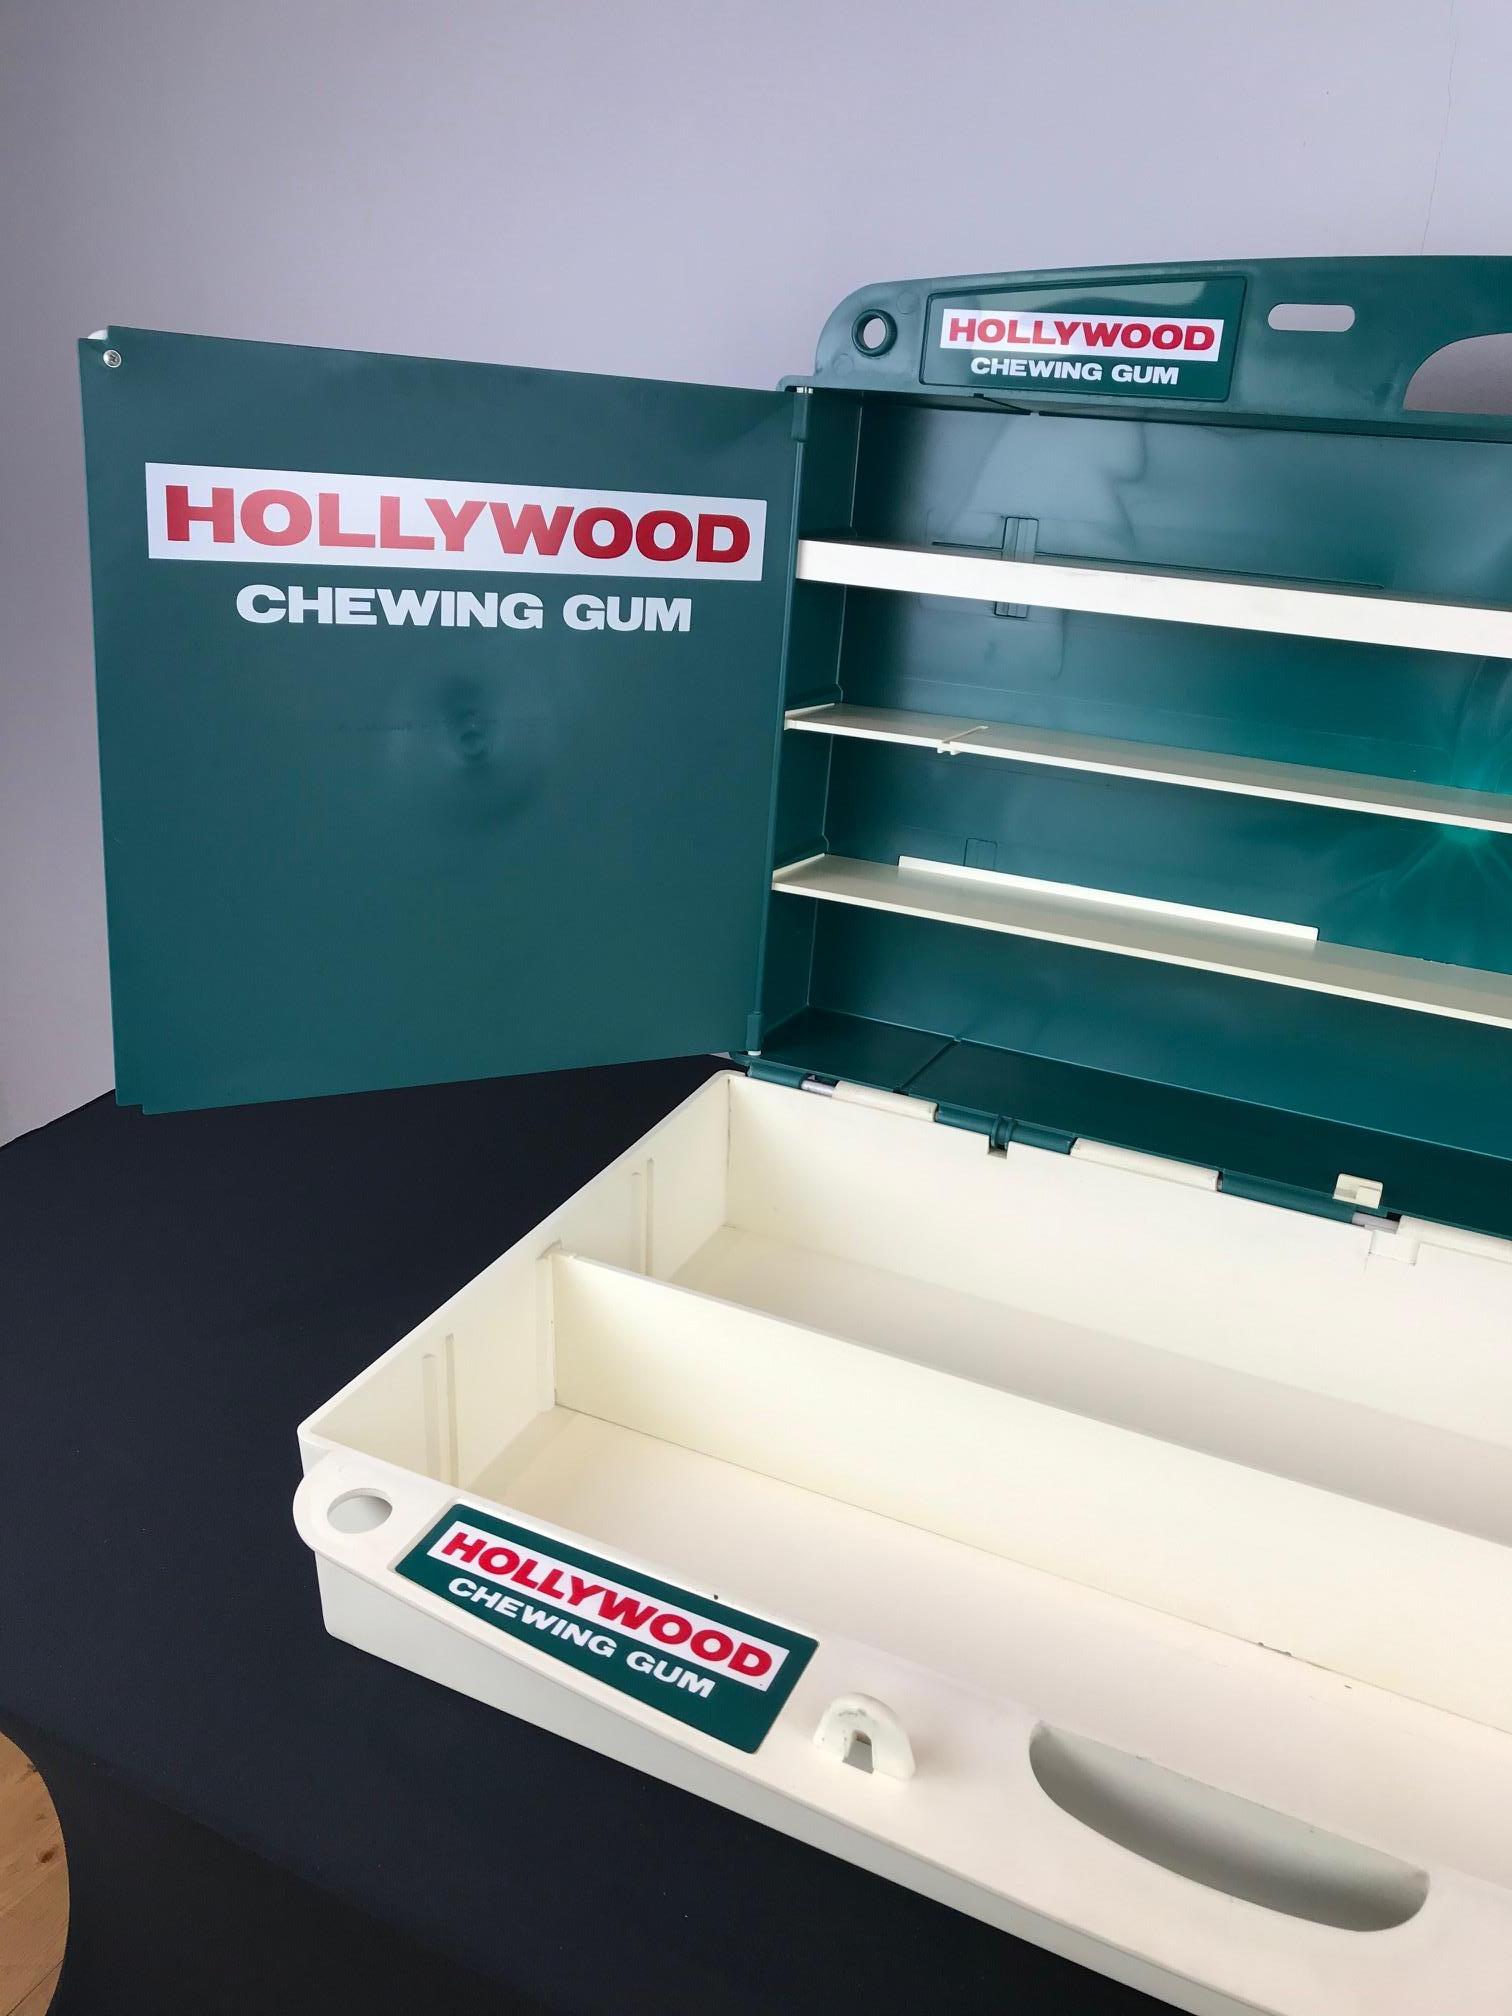 Large Hollywood Chewing Gum Advertising Display Suitcase For Sale 1